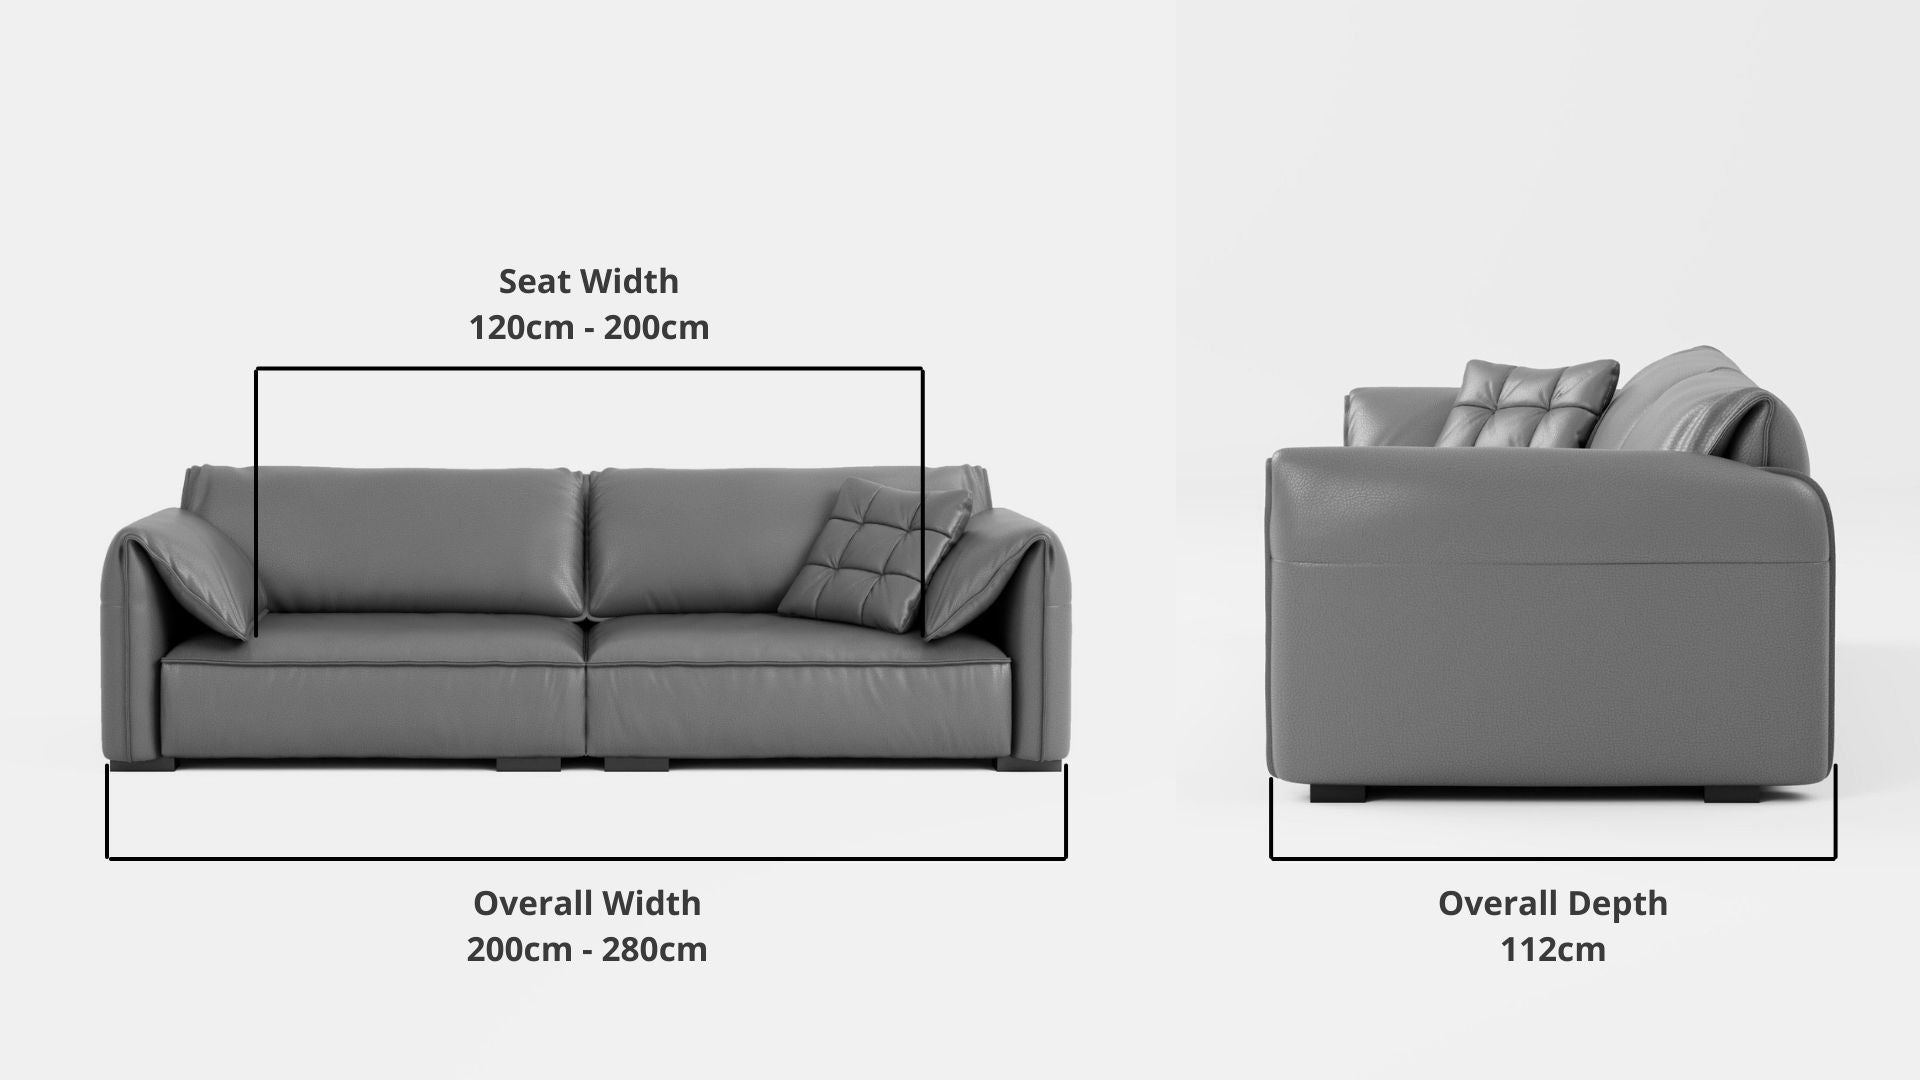 Details the key dimensions in terms of overall width, overall depth and seat width for Comfy Half Leather Sofa